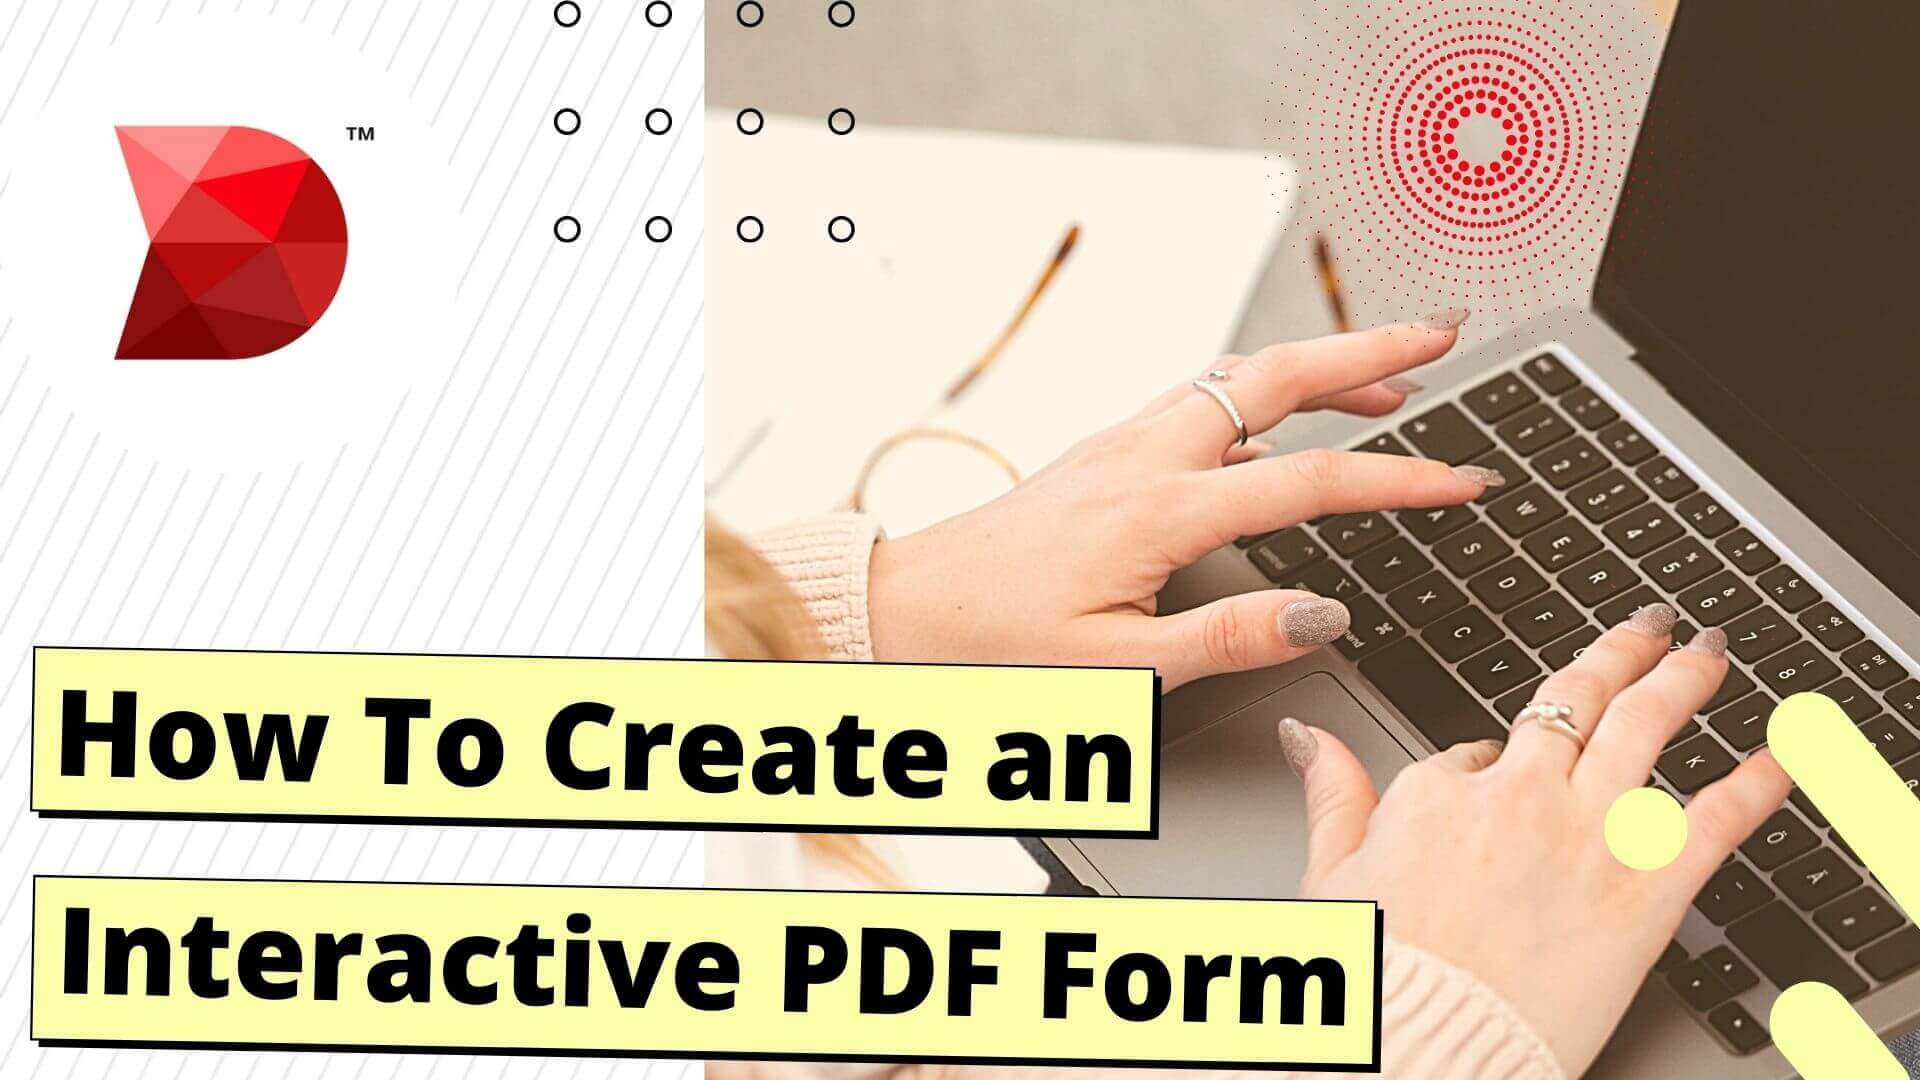 How To Create an Interactive PDF Form